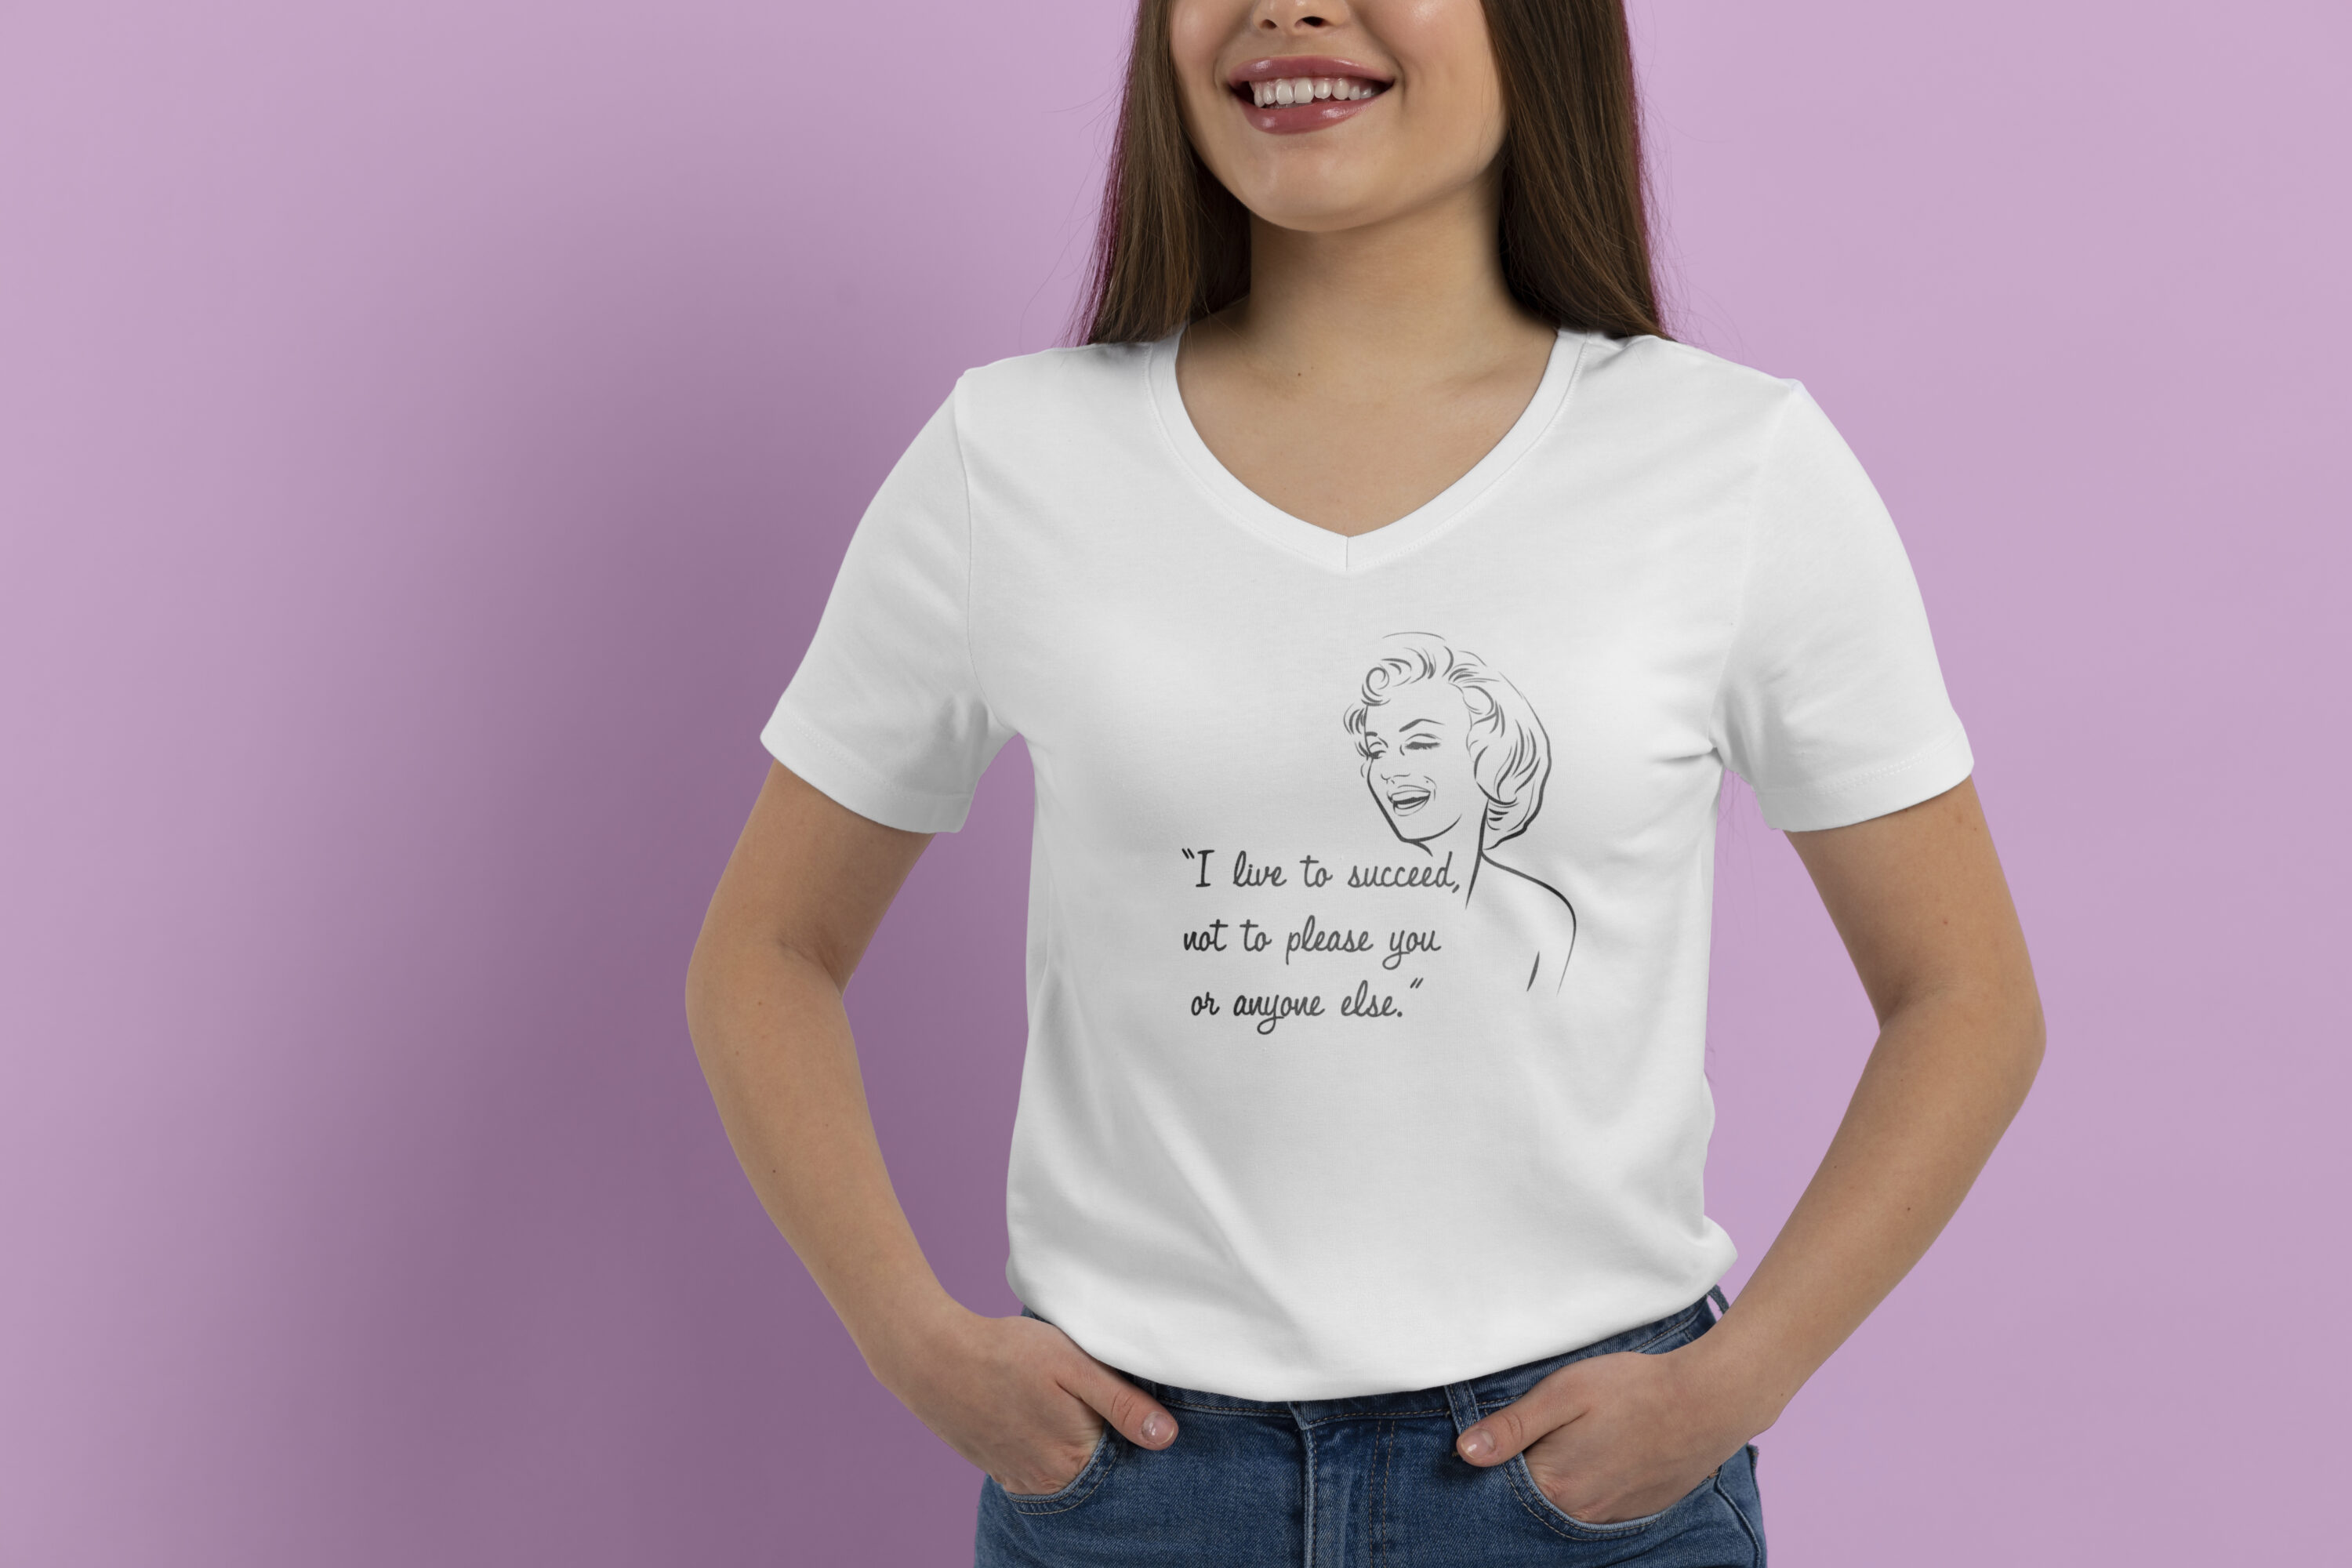 Images of a white t-shirt with a colorful print of the quote Marilyn Monroe.